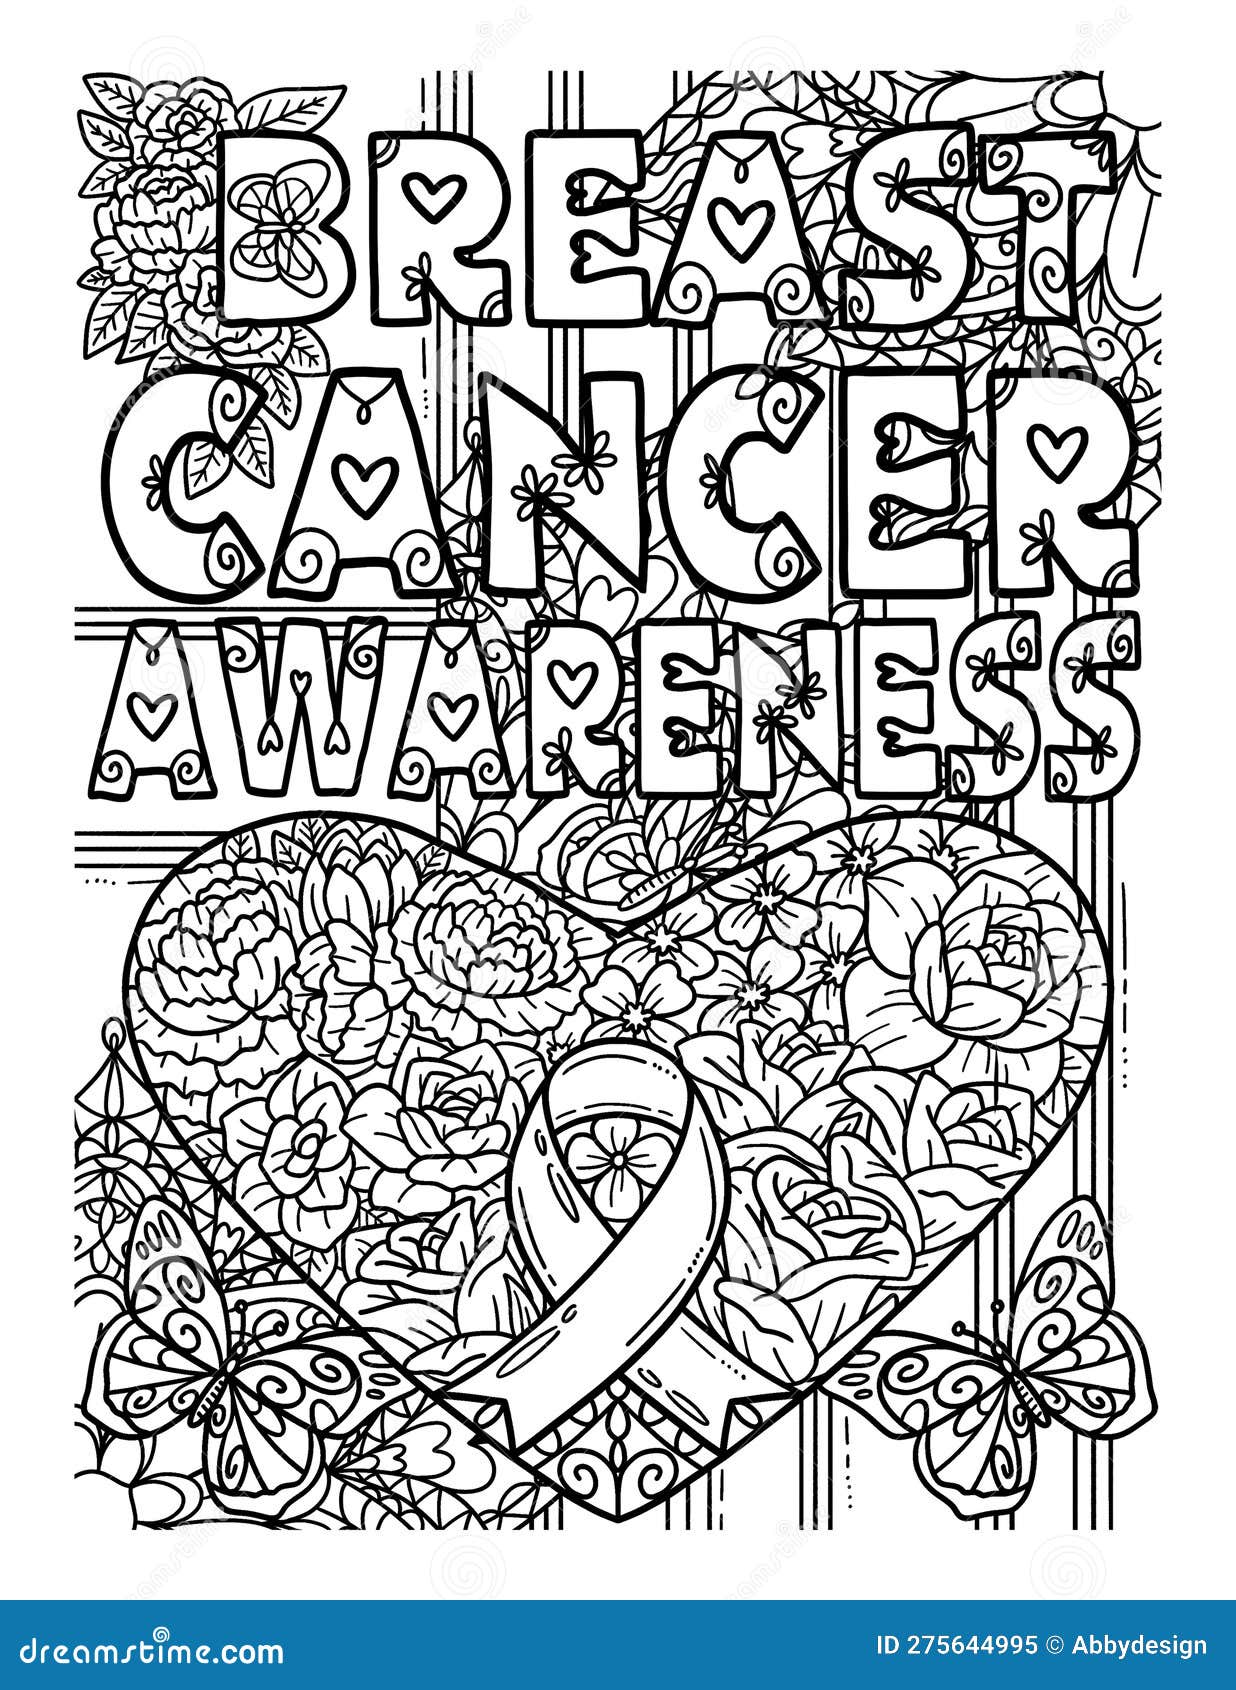 Breast cancer awareness coloring page for adult stock vector